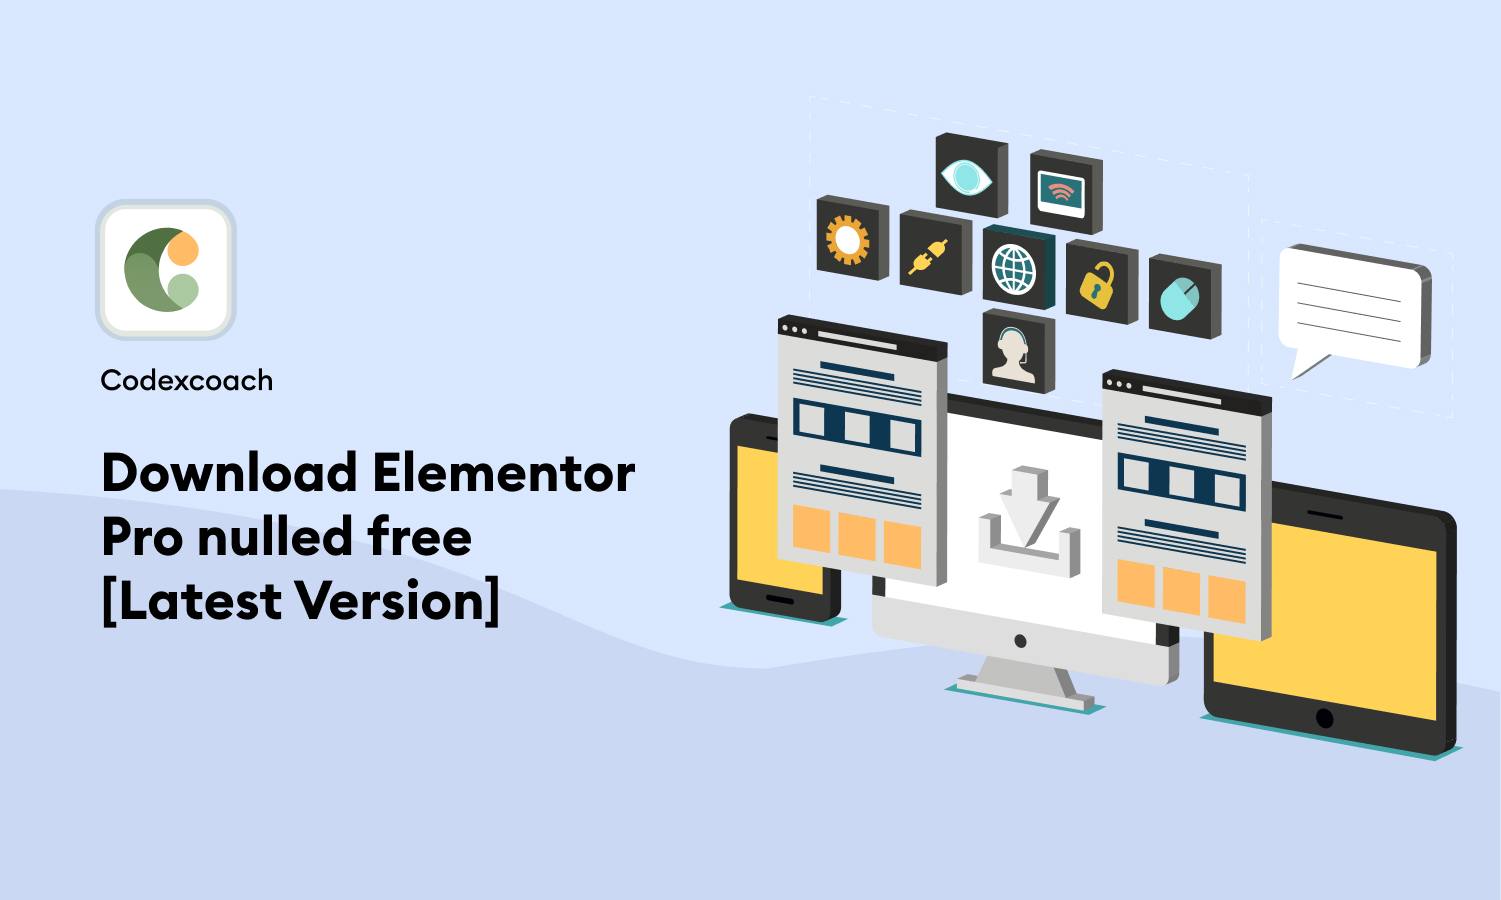 Download Elementor Pro nulle free Latest Version